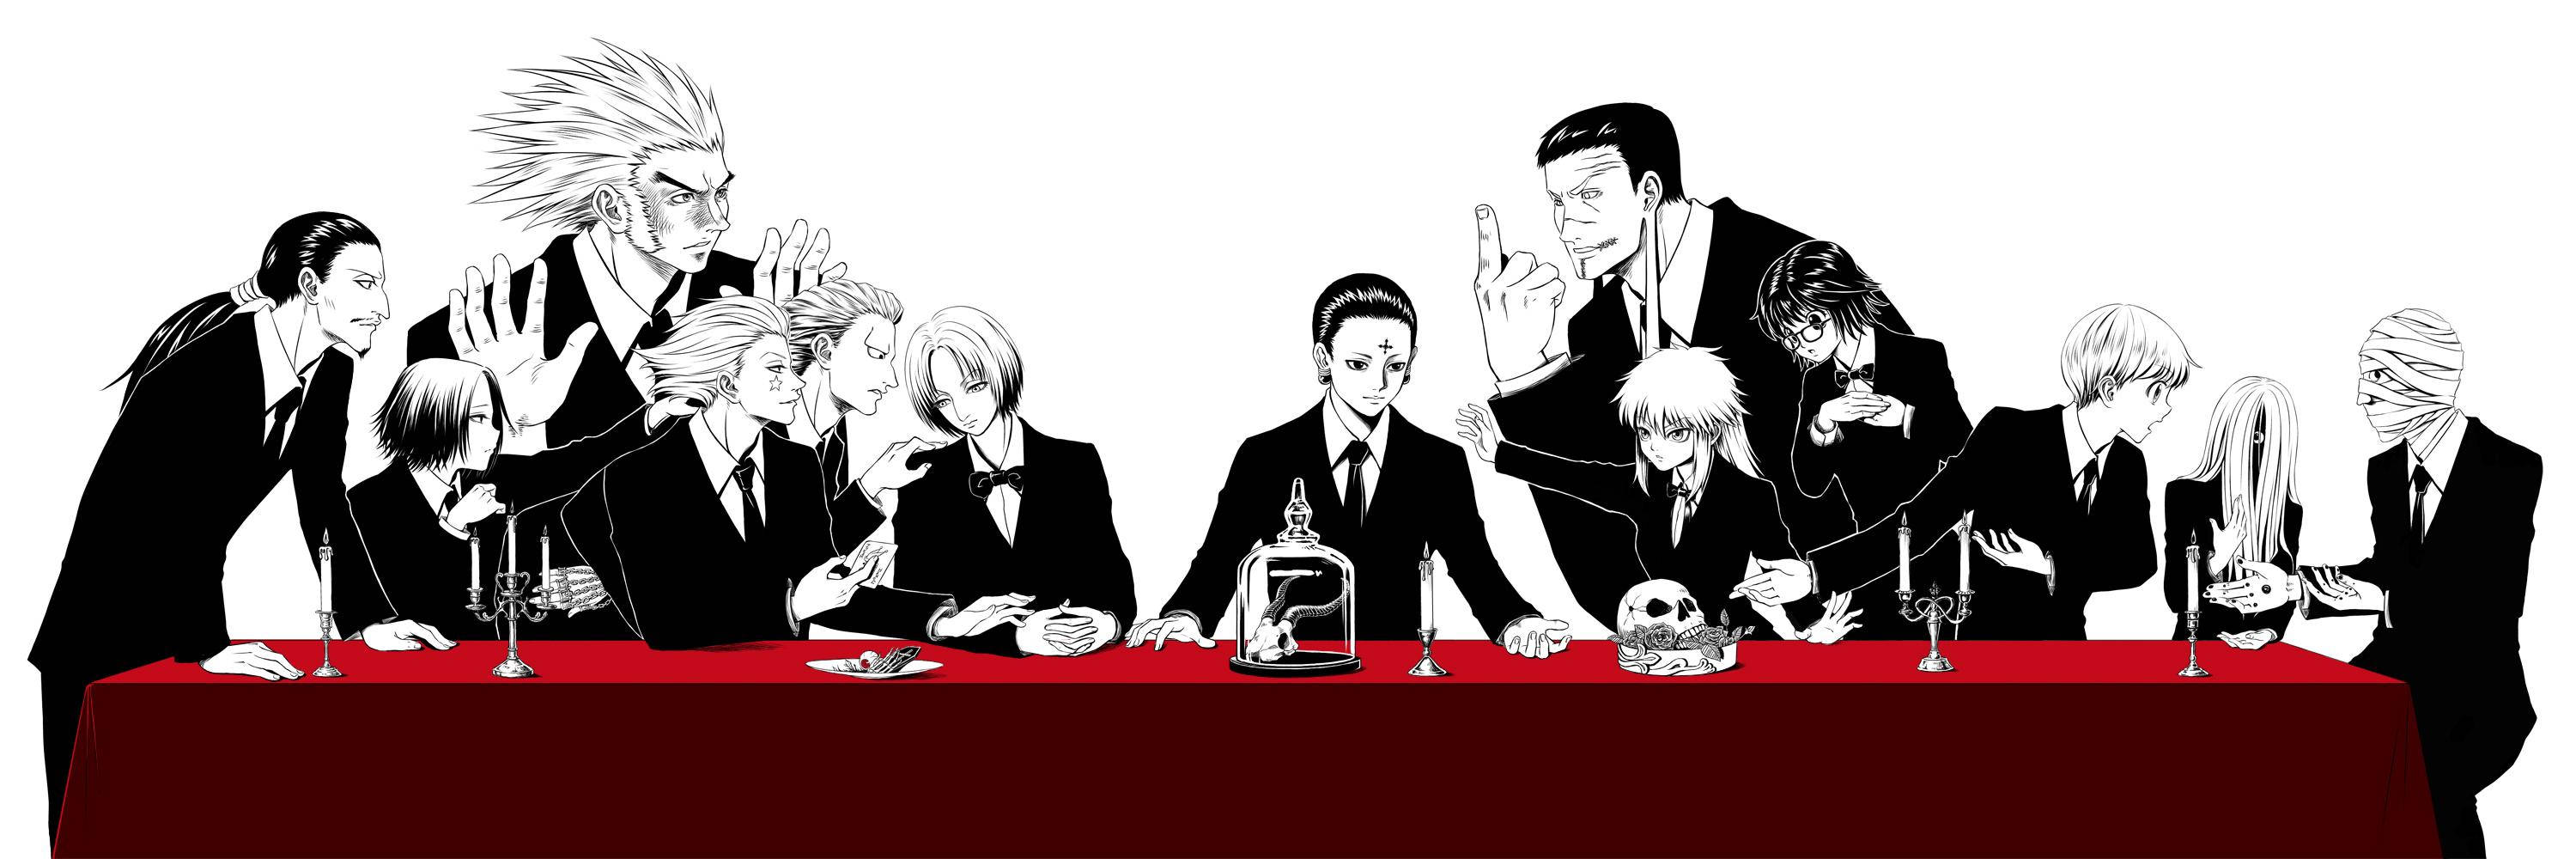 Phantom Troupe On Red Table Background